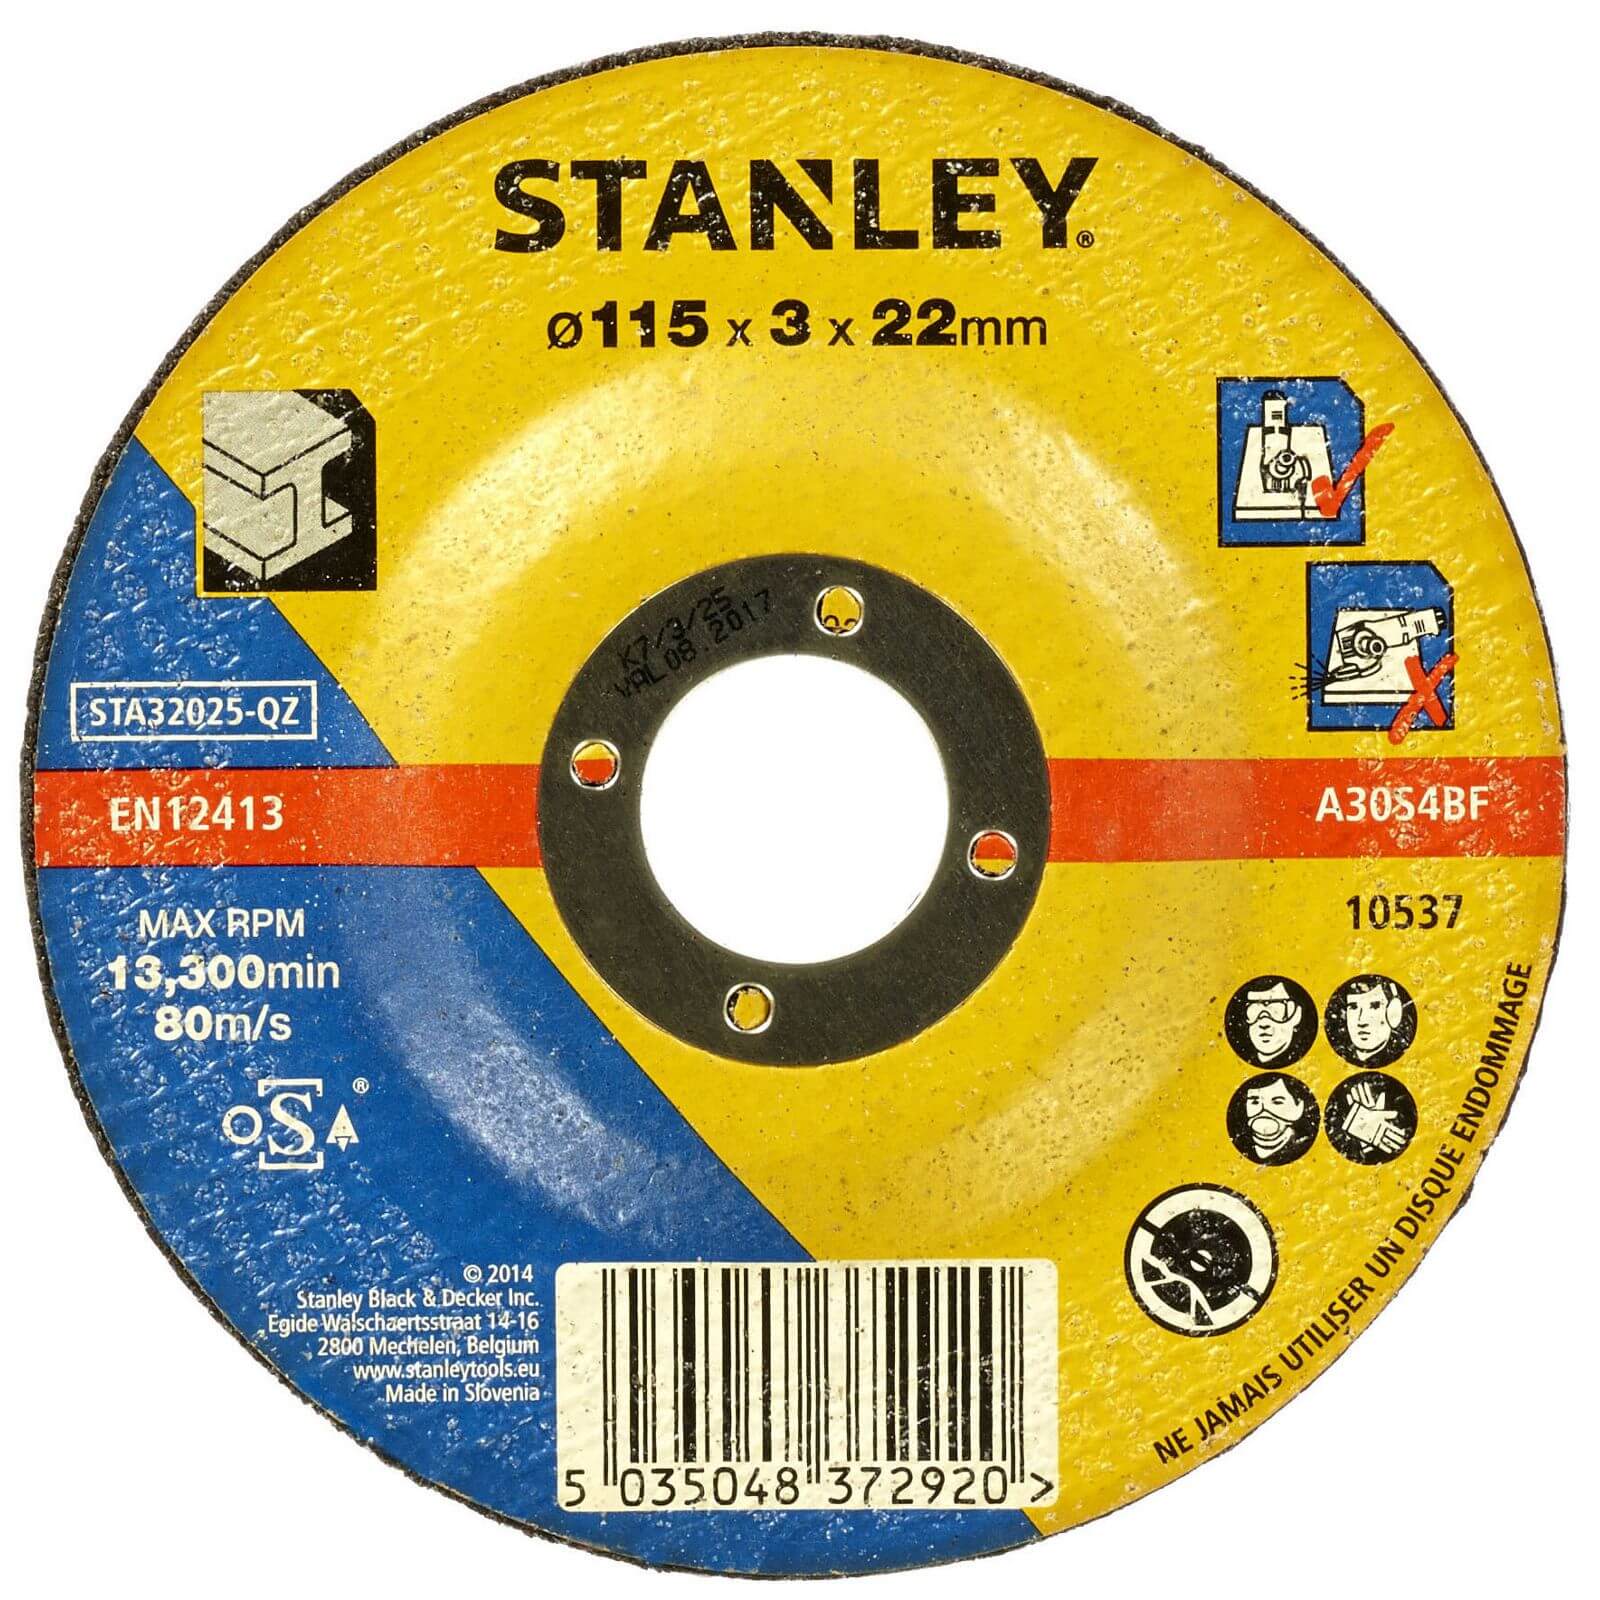 Photo of Stanley 115mm Metal Cutting Disc - Sta32025-qz